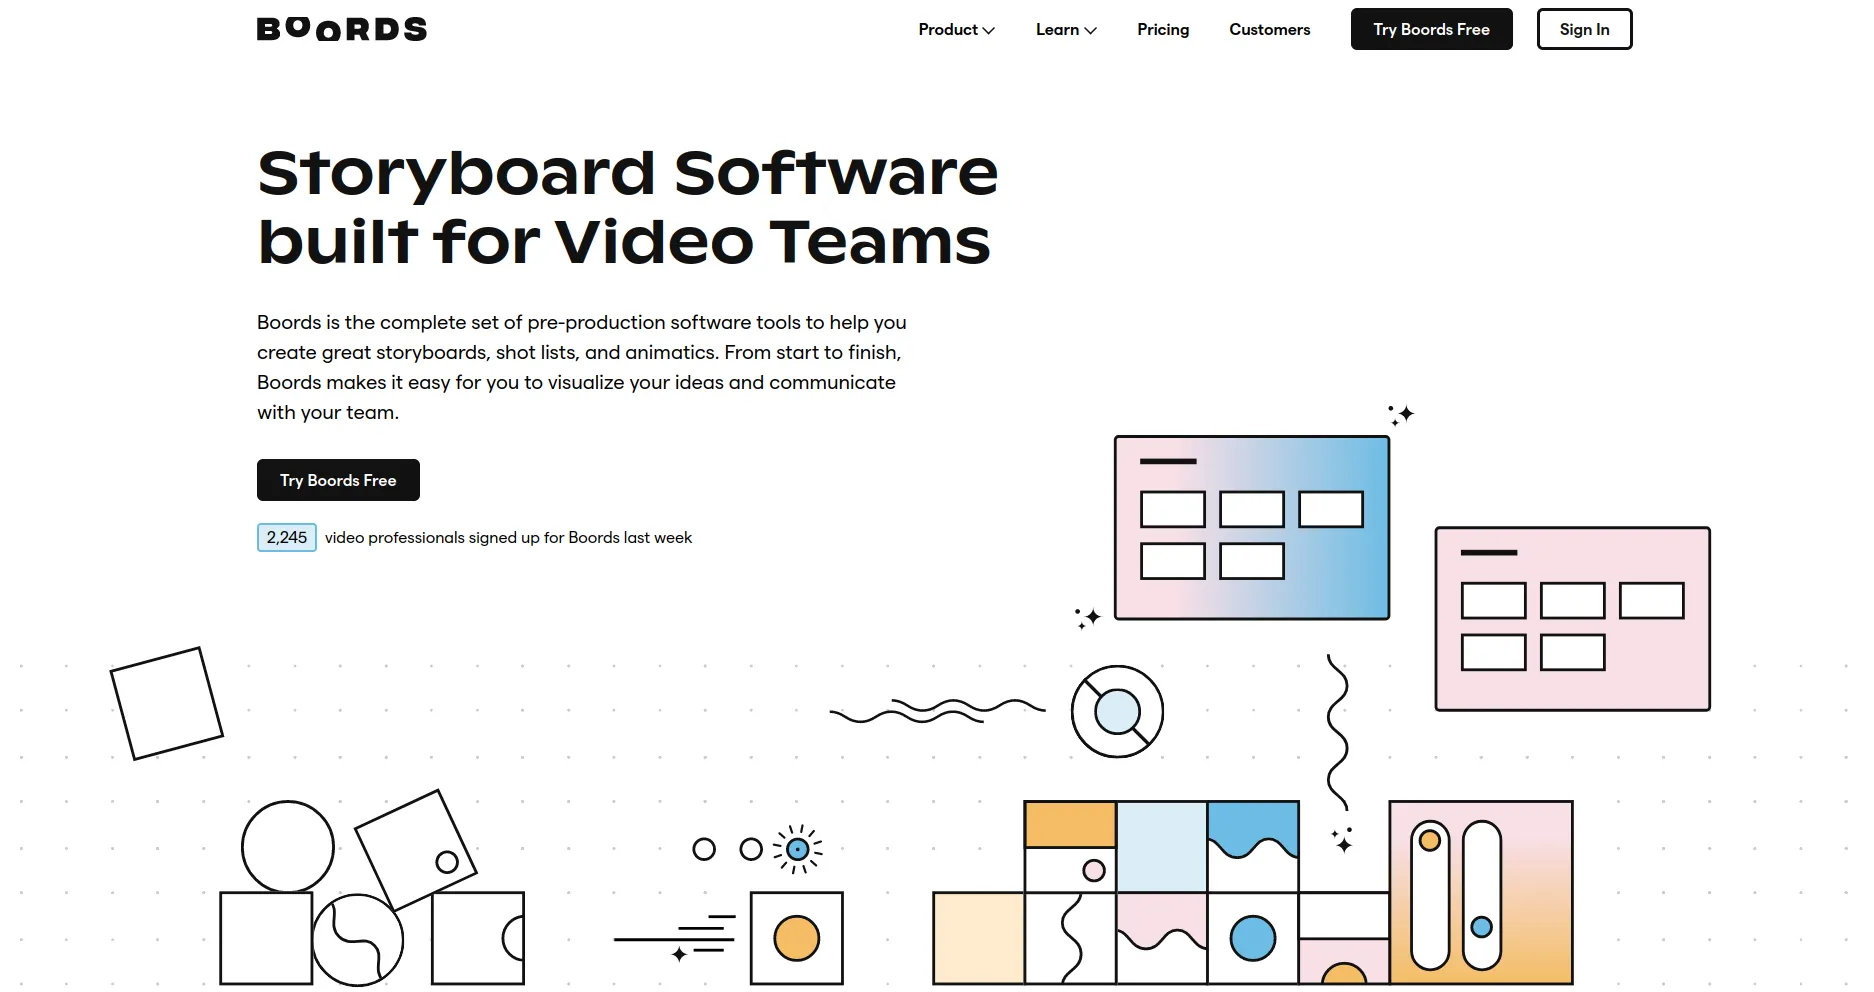 Boords storyboard software